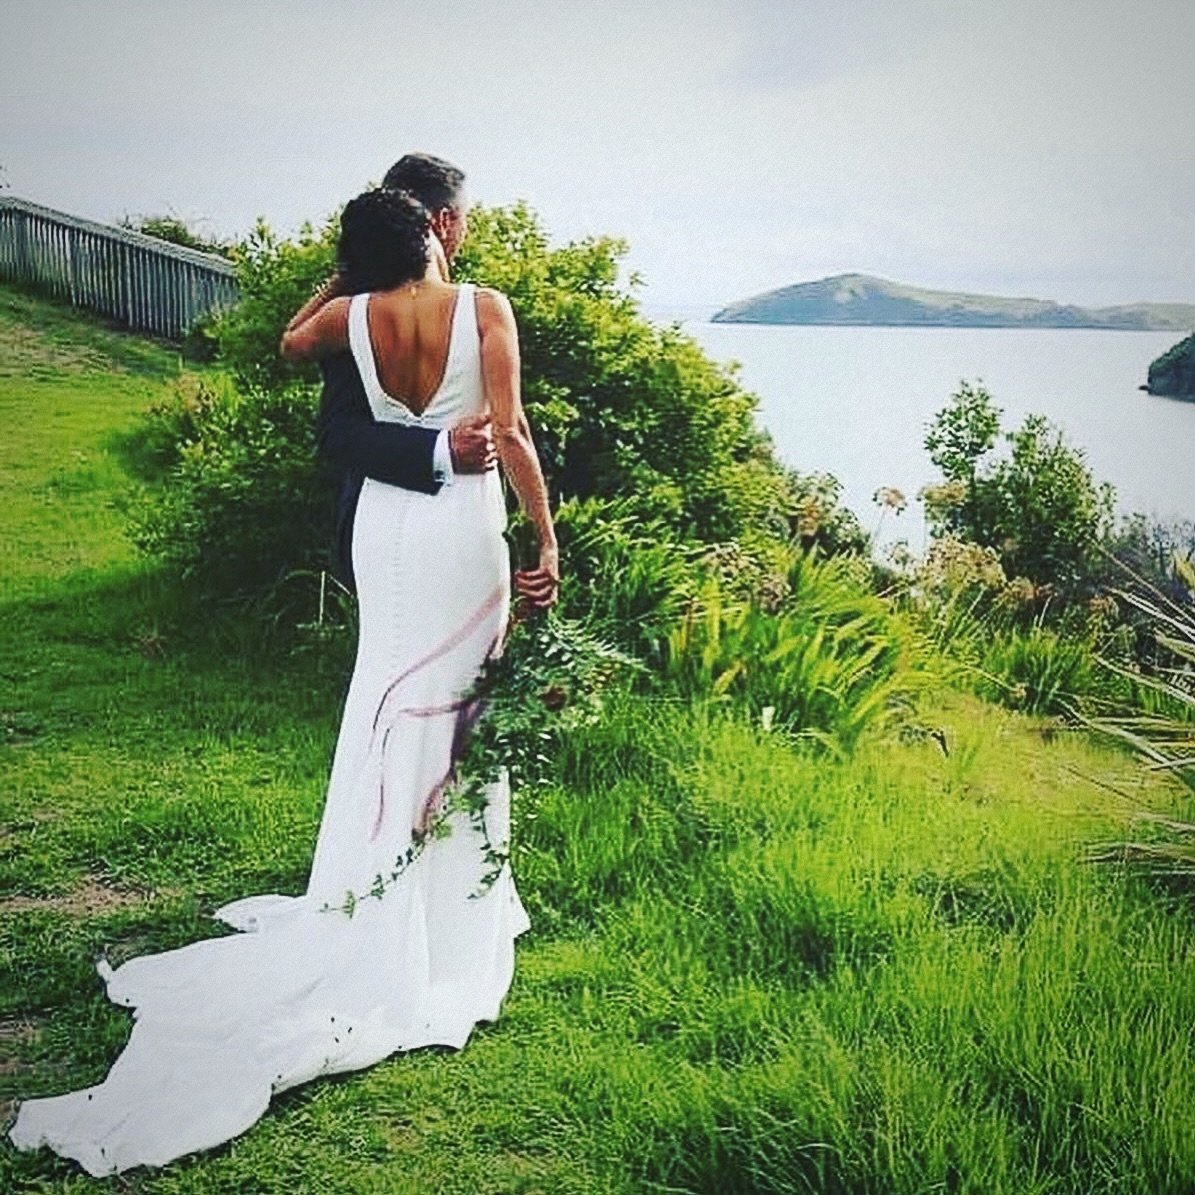 Gorgeous vistas, Coromandel has all the locations for your amazing elopement photoshoots! Local knowledge is everything! 🙌🏼